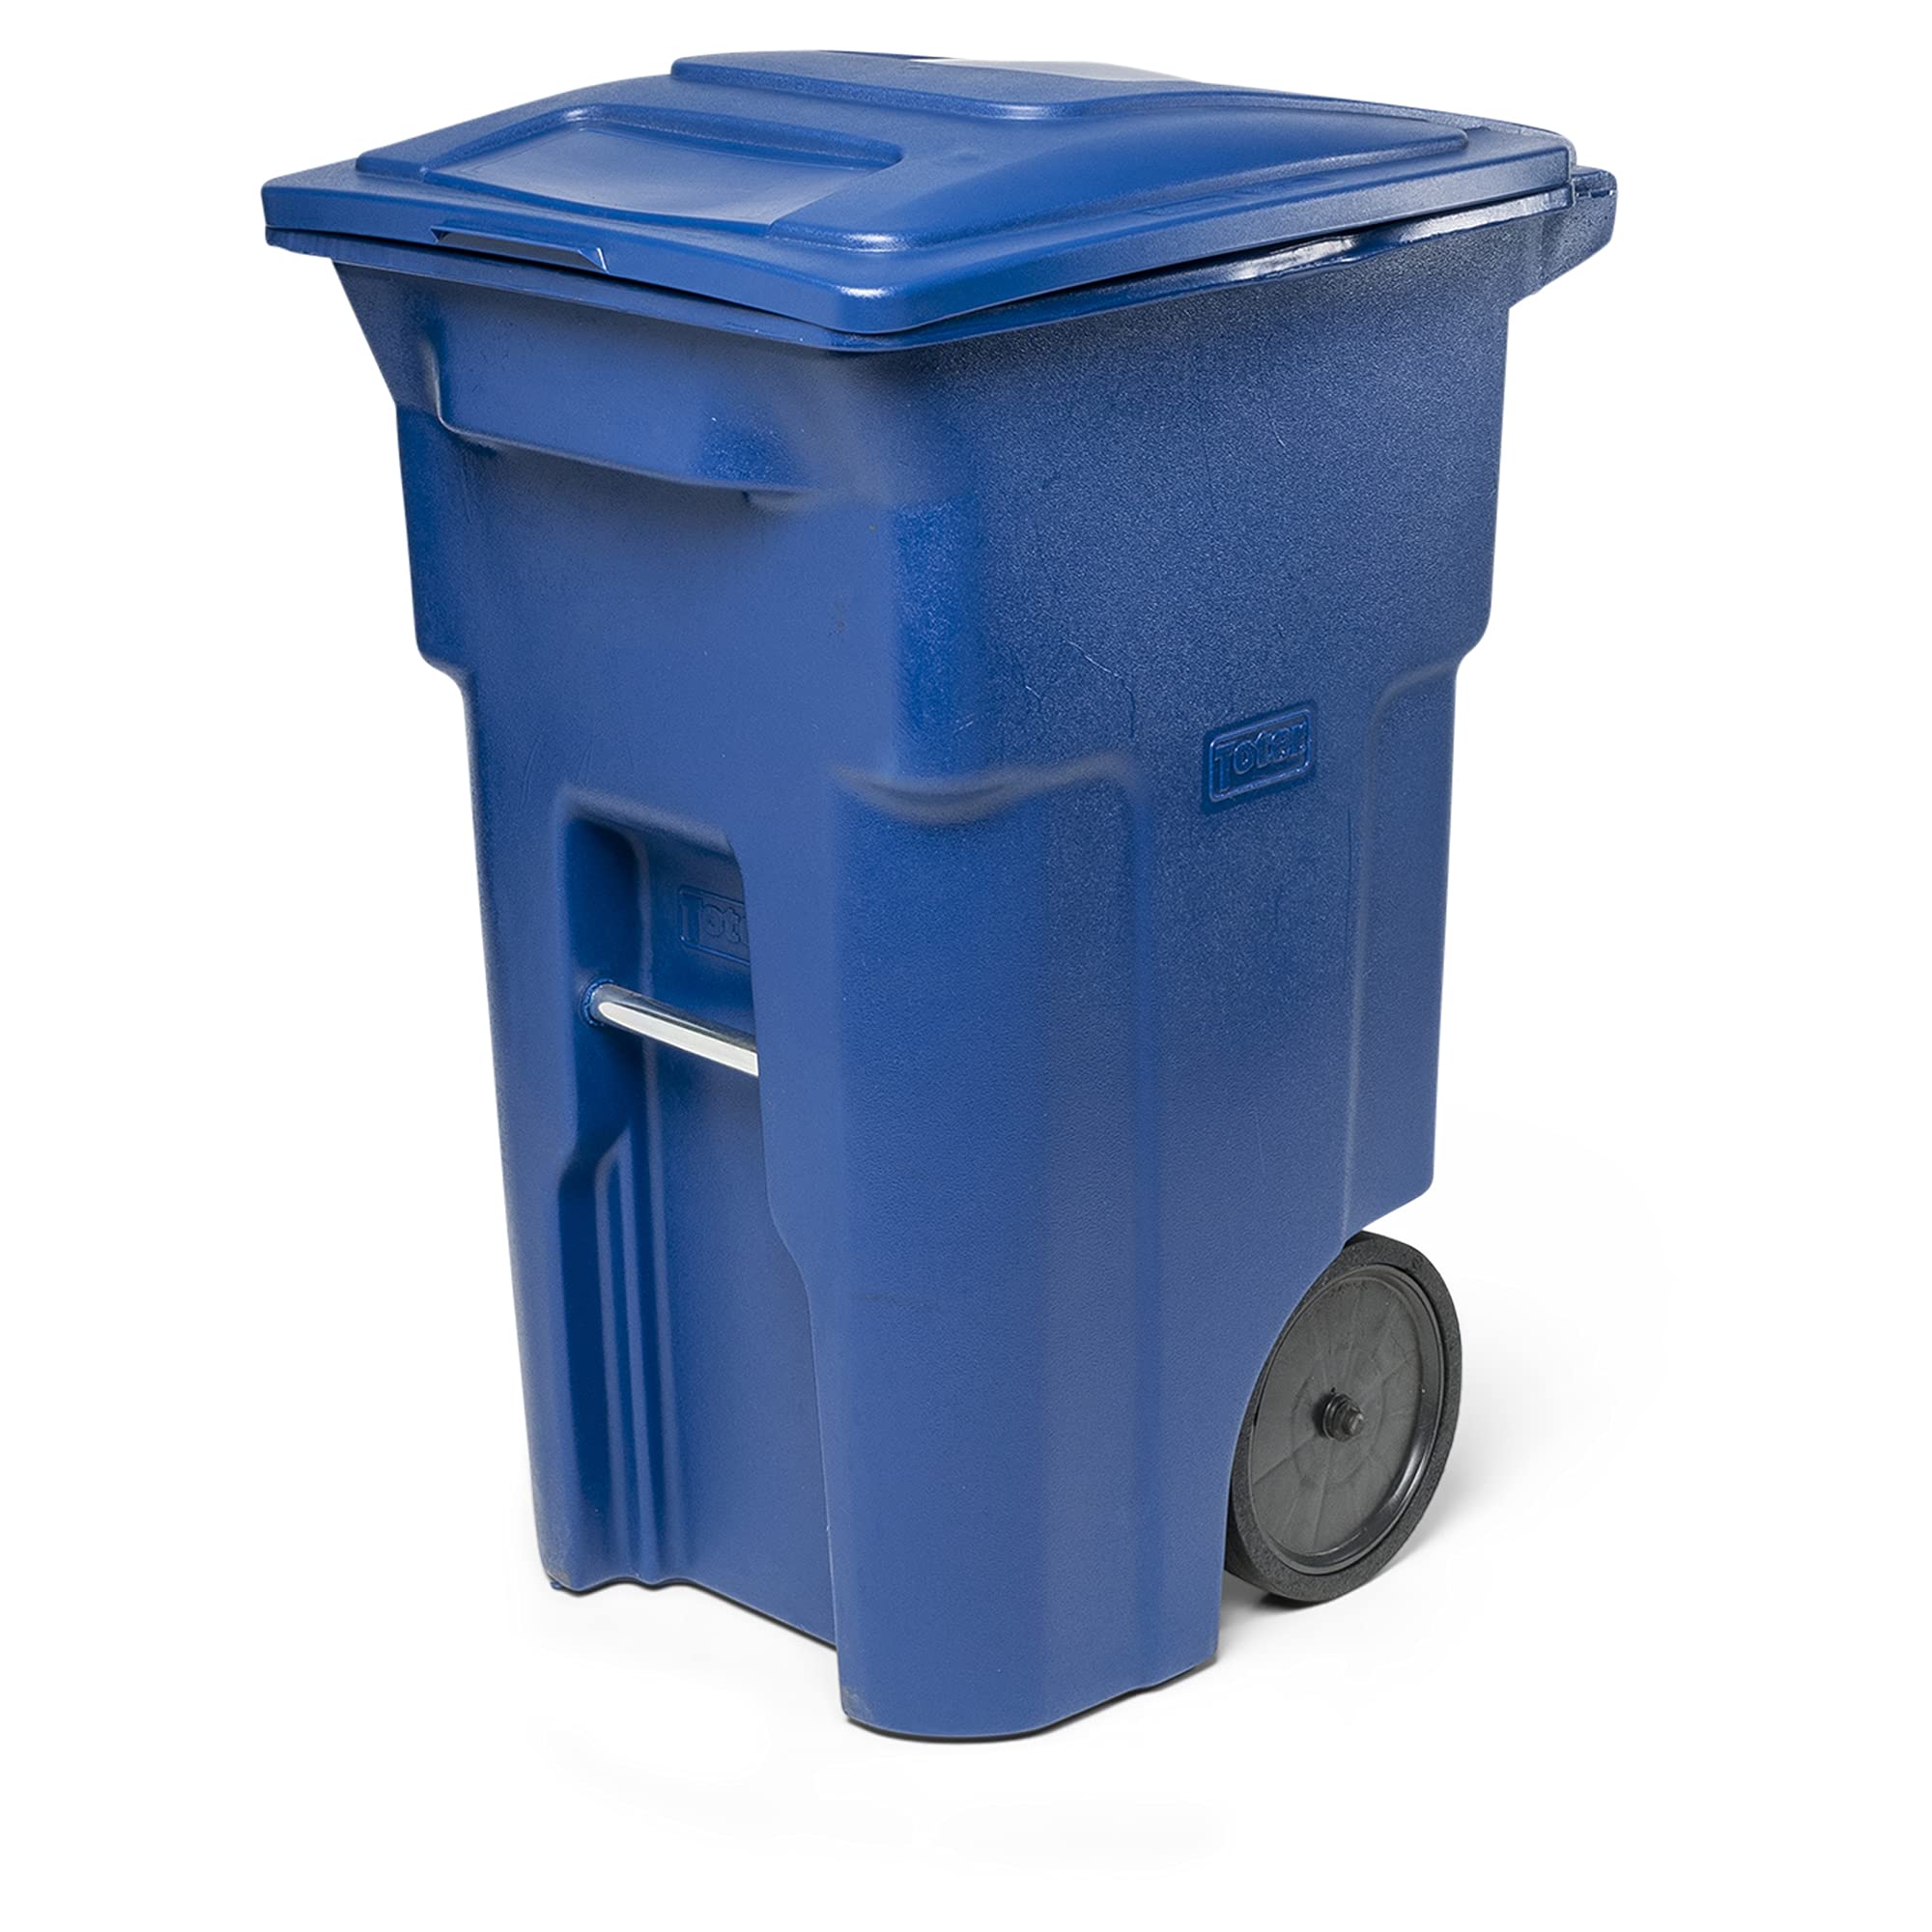 Toter 64 Gal. Trash Can Blue with Quiet Wheels and Lid